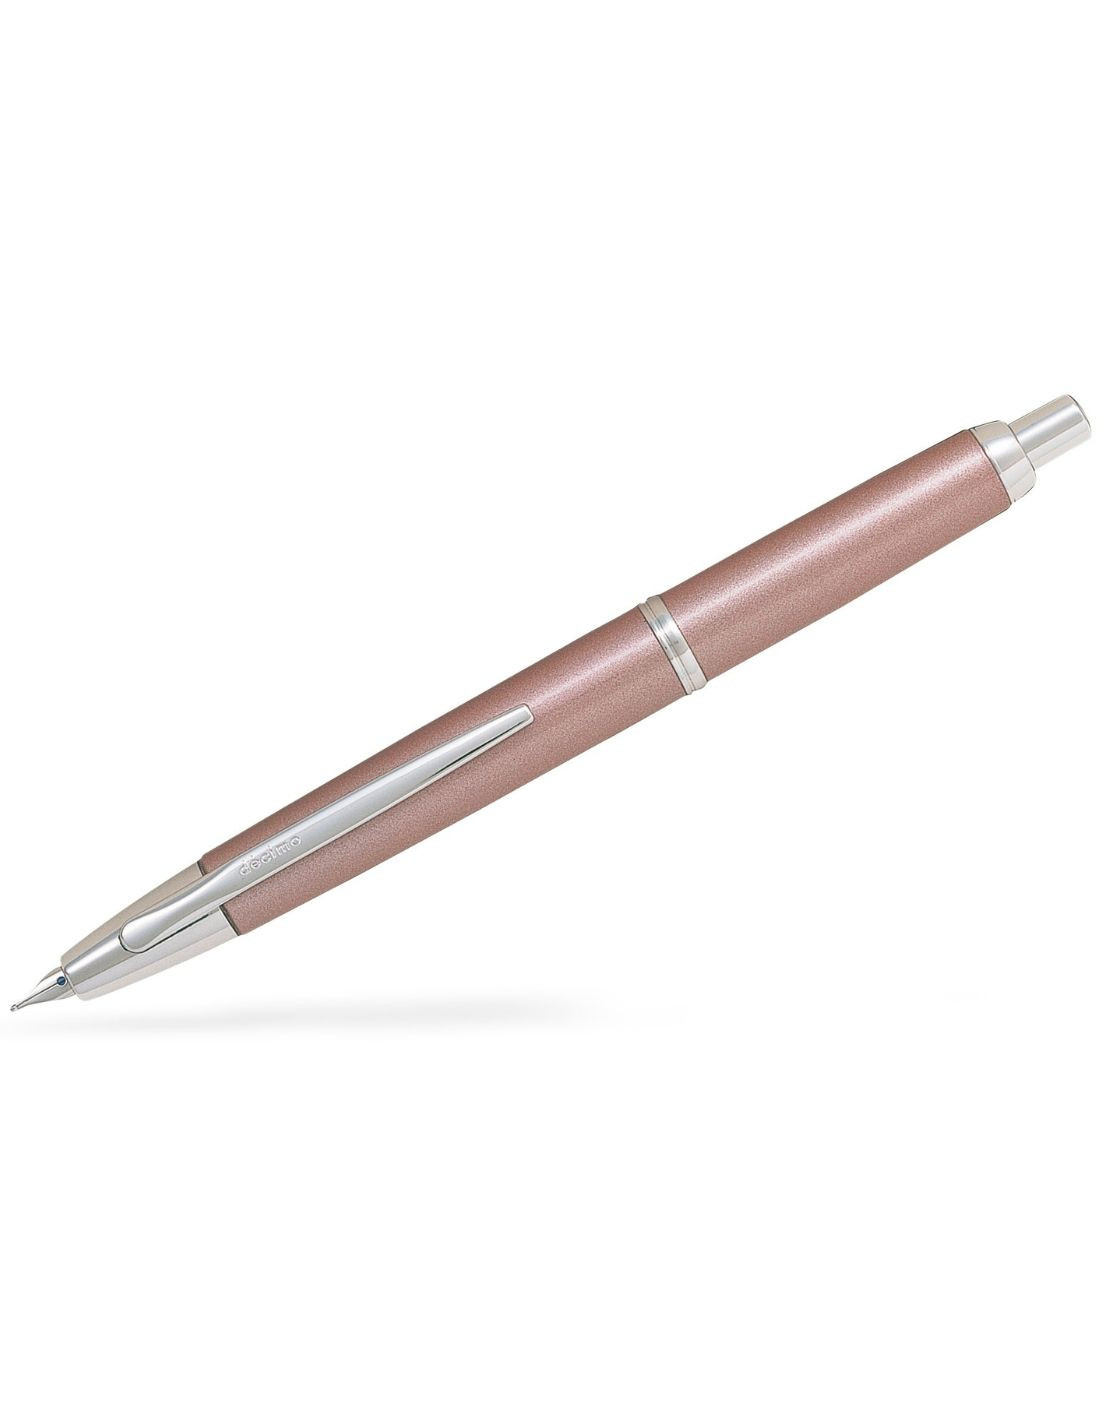 Stylo-plume Pilot CAPLESS - Décimo - Rose Champagne